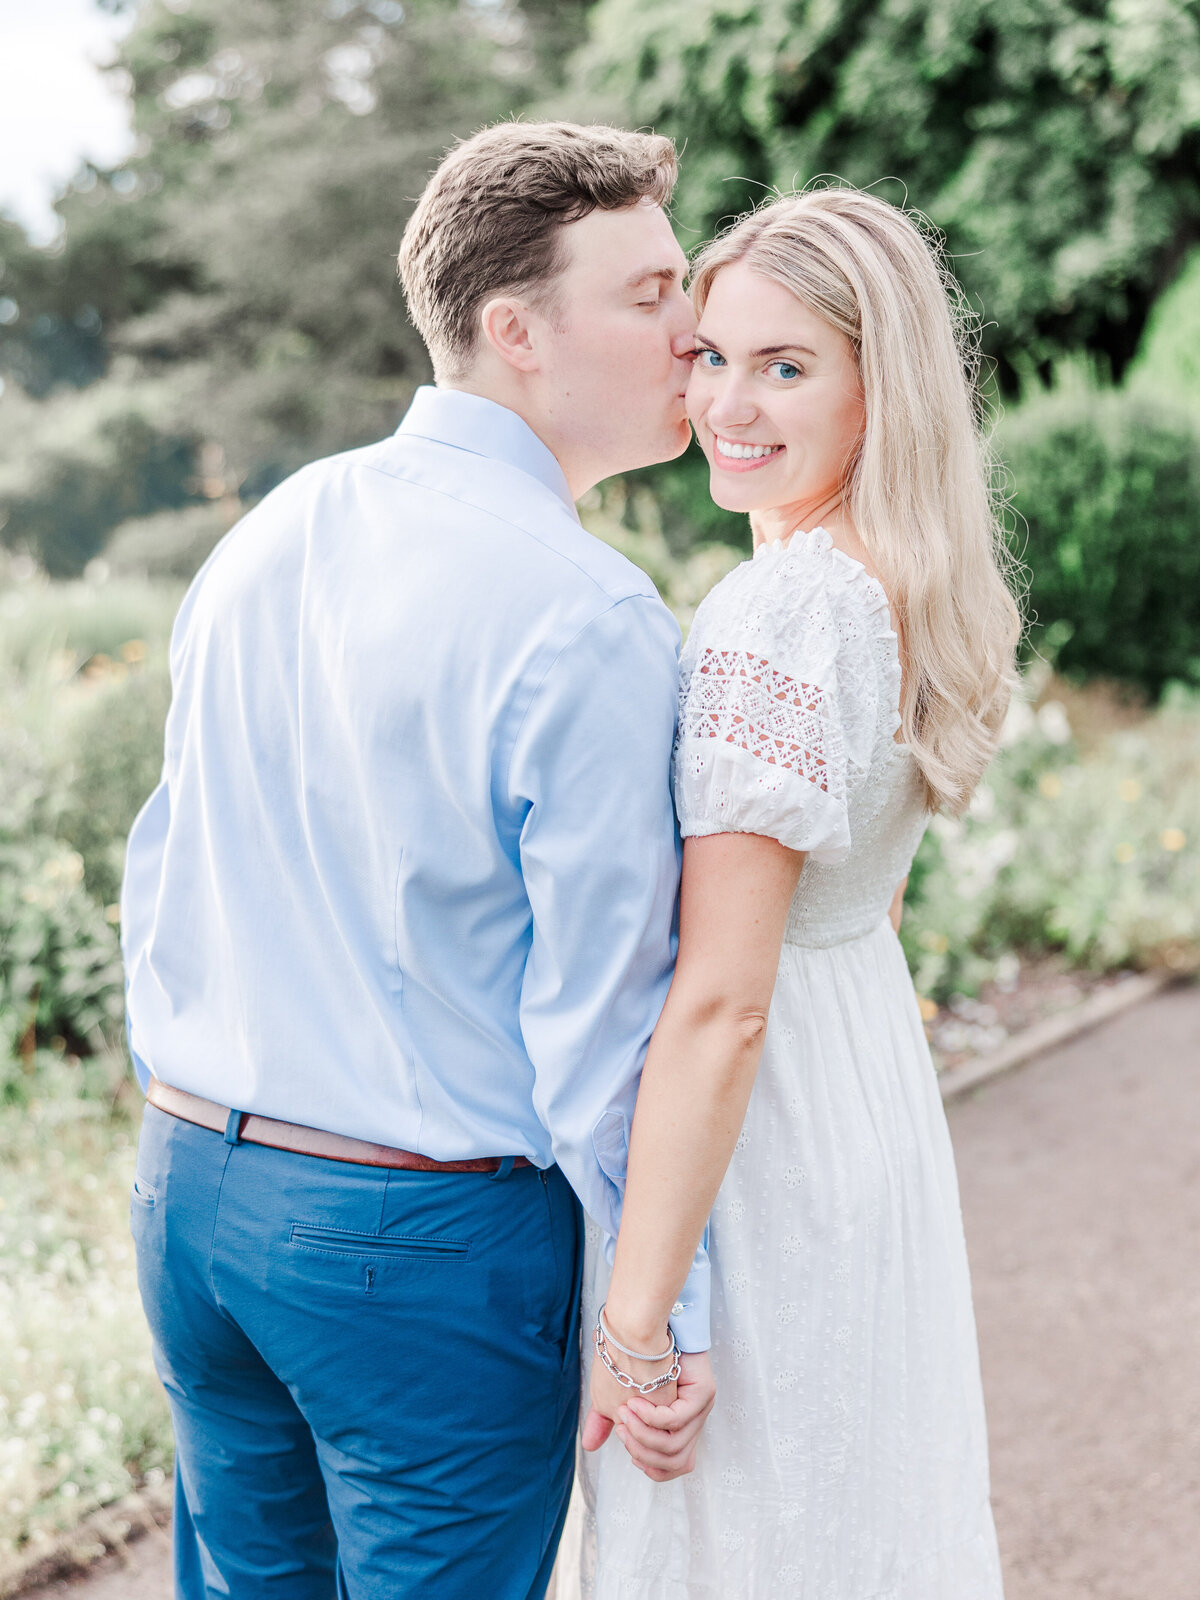 christine-antonio-engagement-session-eolia-mansion-harkness-park-waterford-ct-80